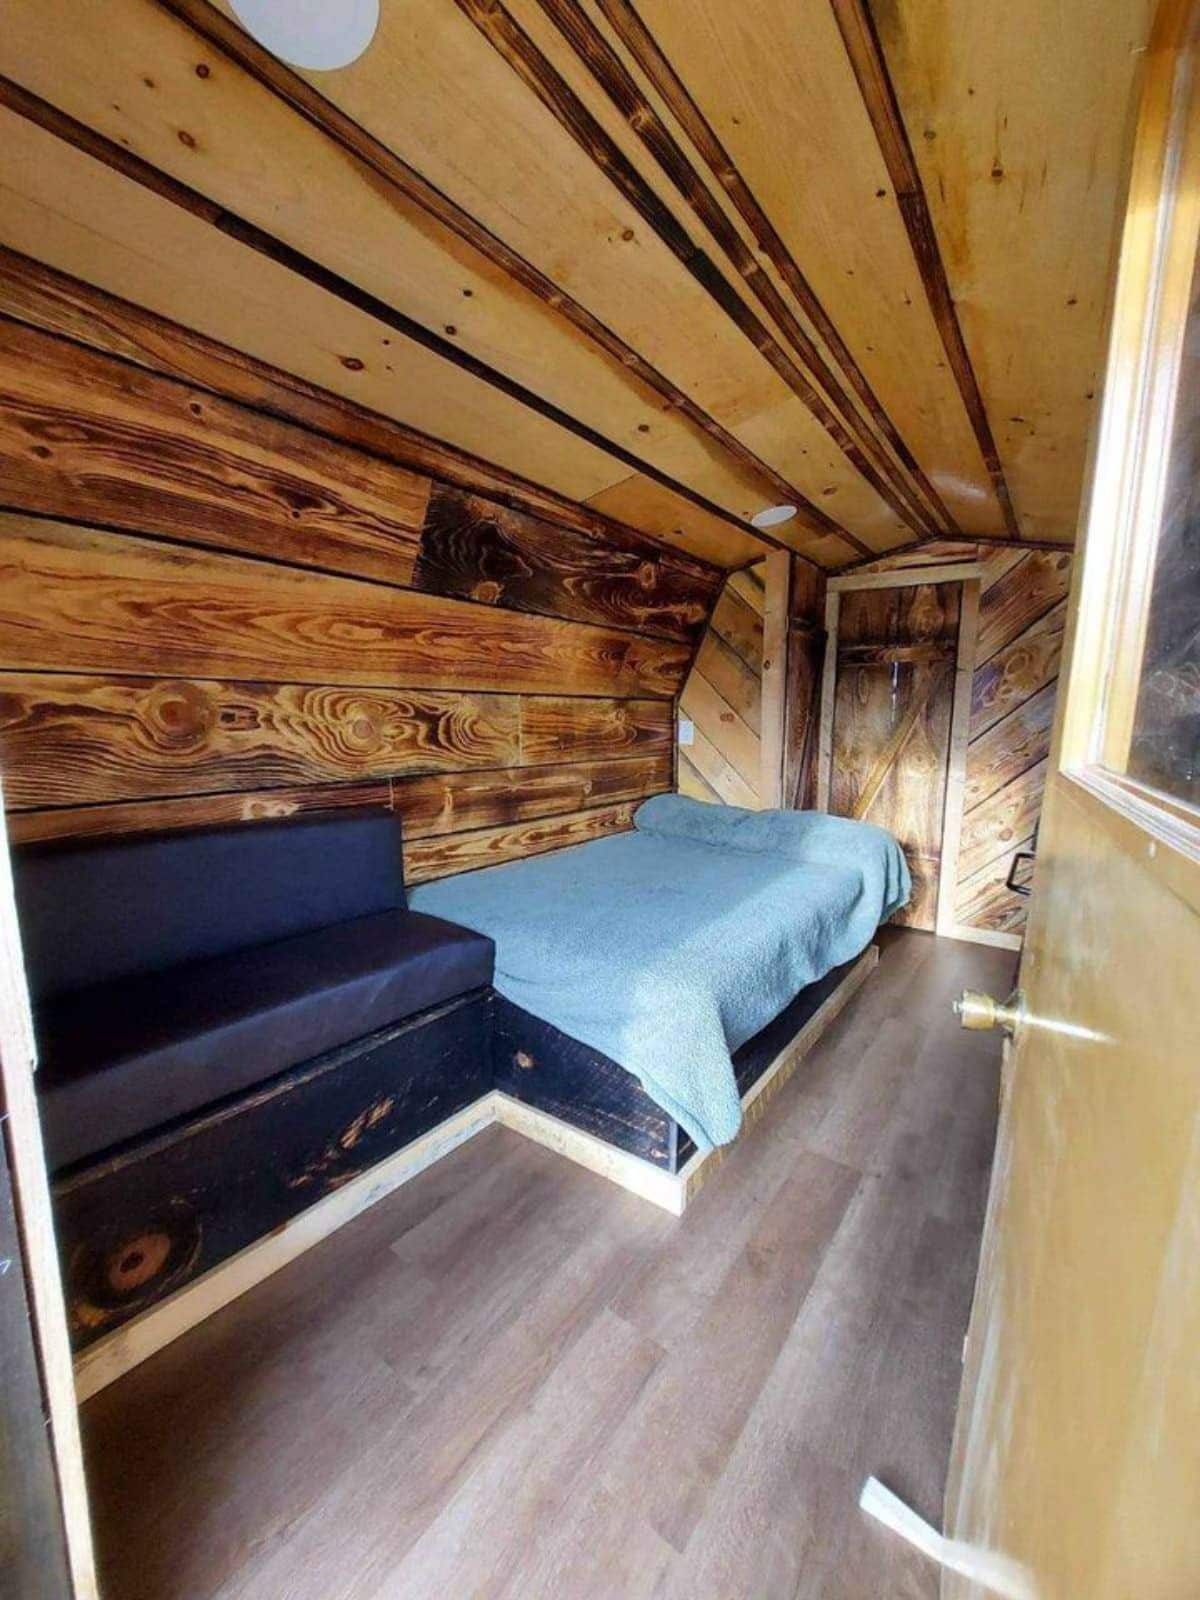 2 Seater couch in living area of tiny home with free delivery